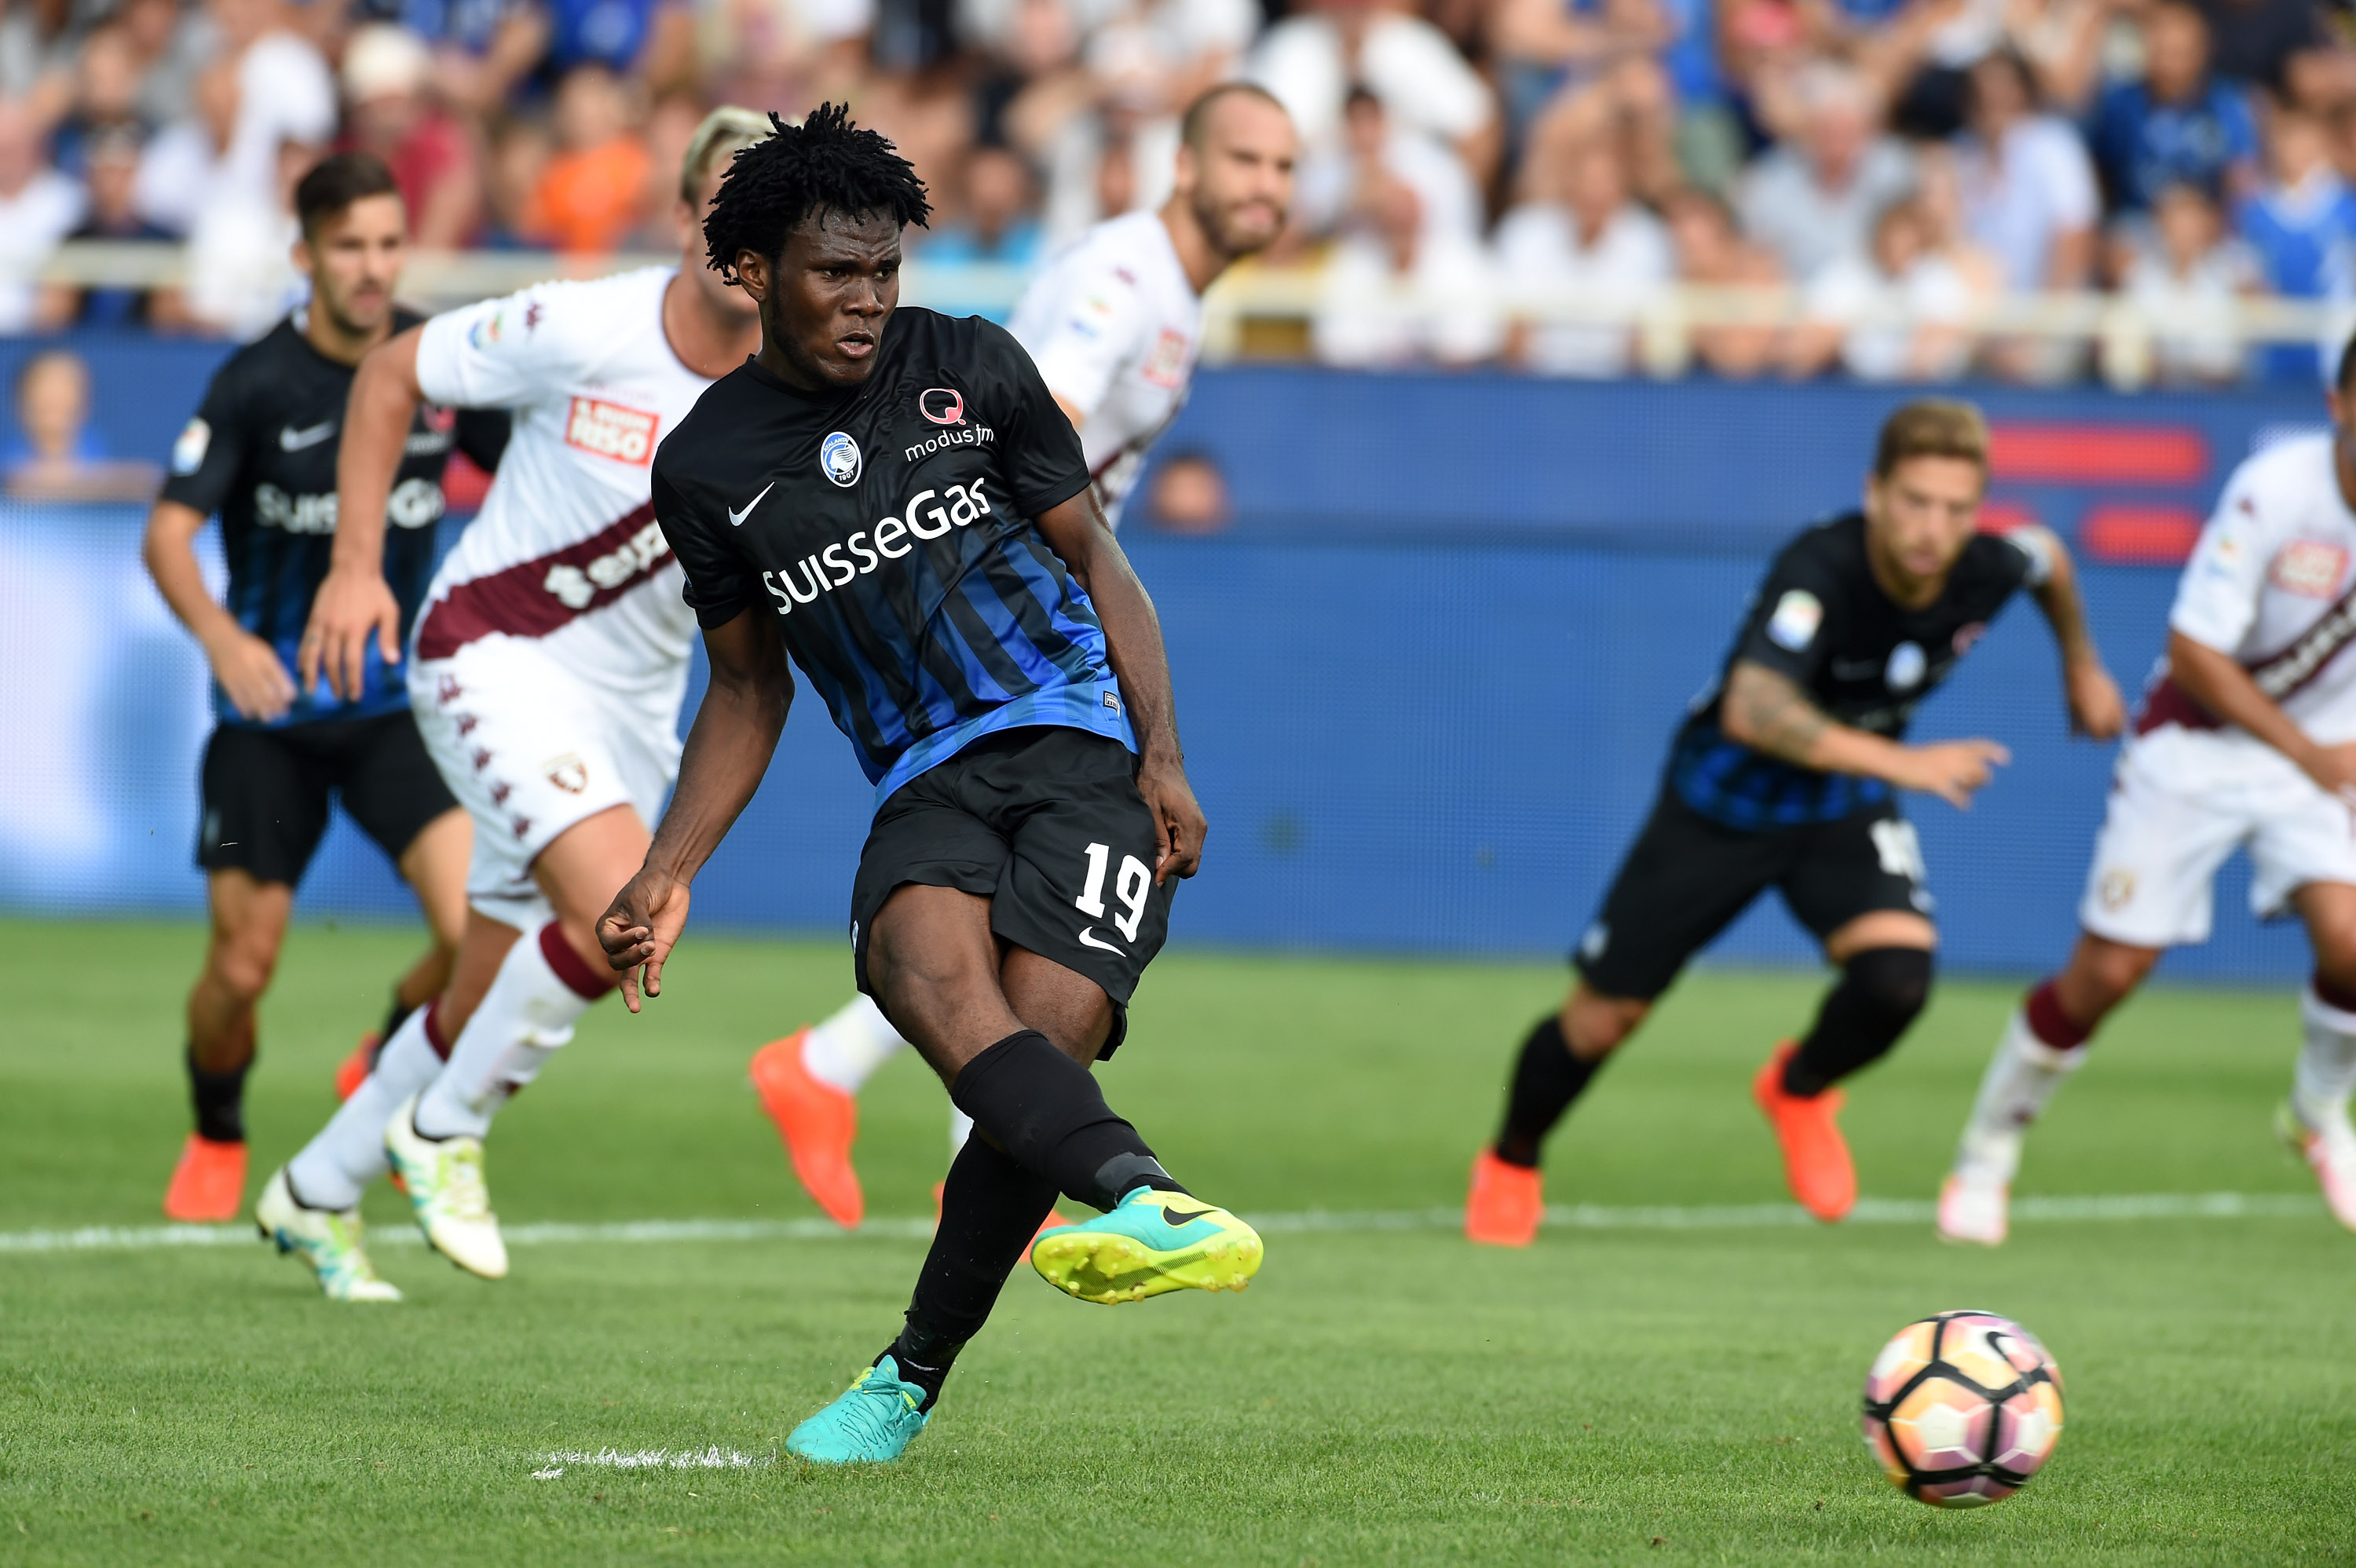 Kessie has captured the imagination of the Serie A followers with a magical start to the season and the 19-year-old has already made public of his affection towards Manchester United. (Picture Courtesy - AFP/Getty Images)